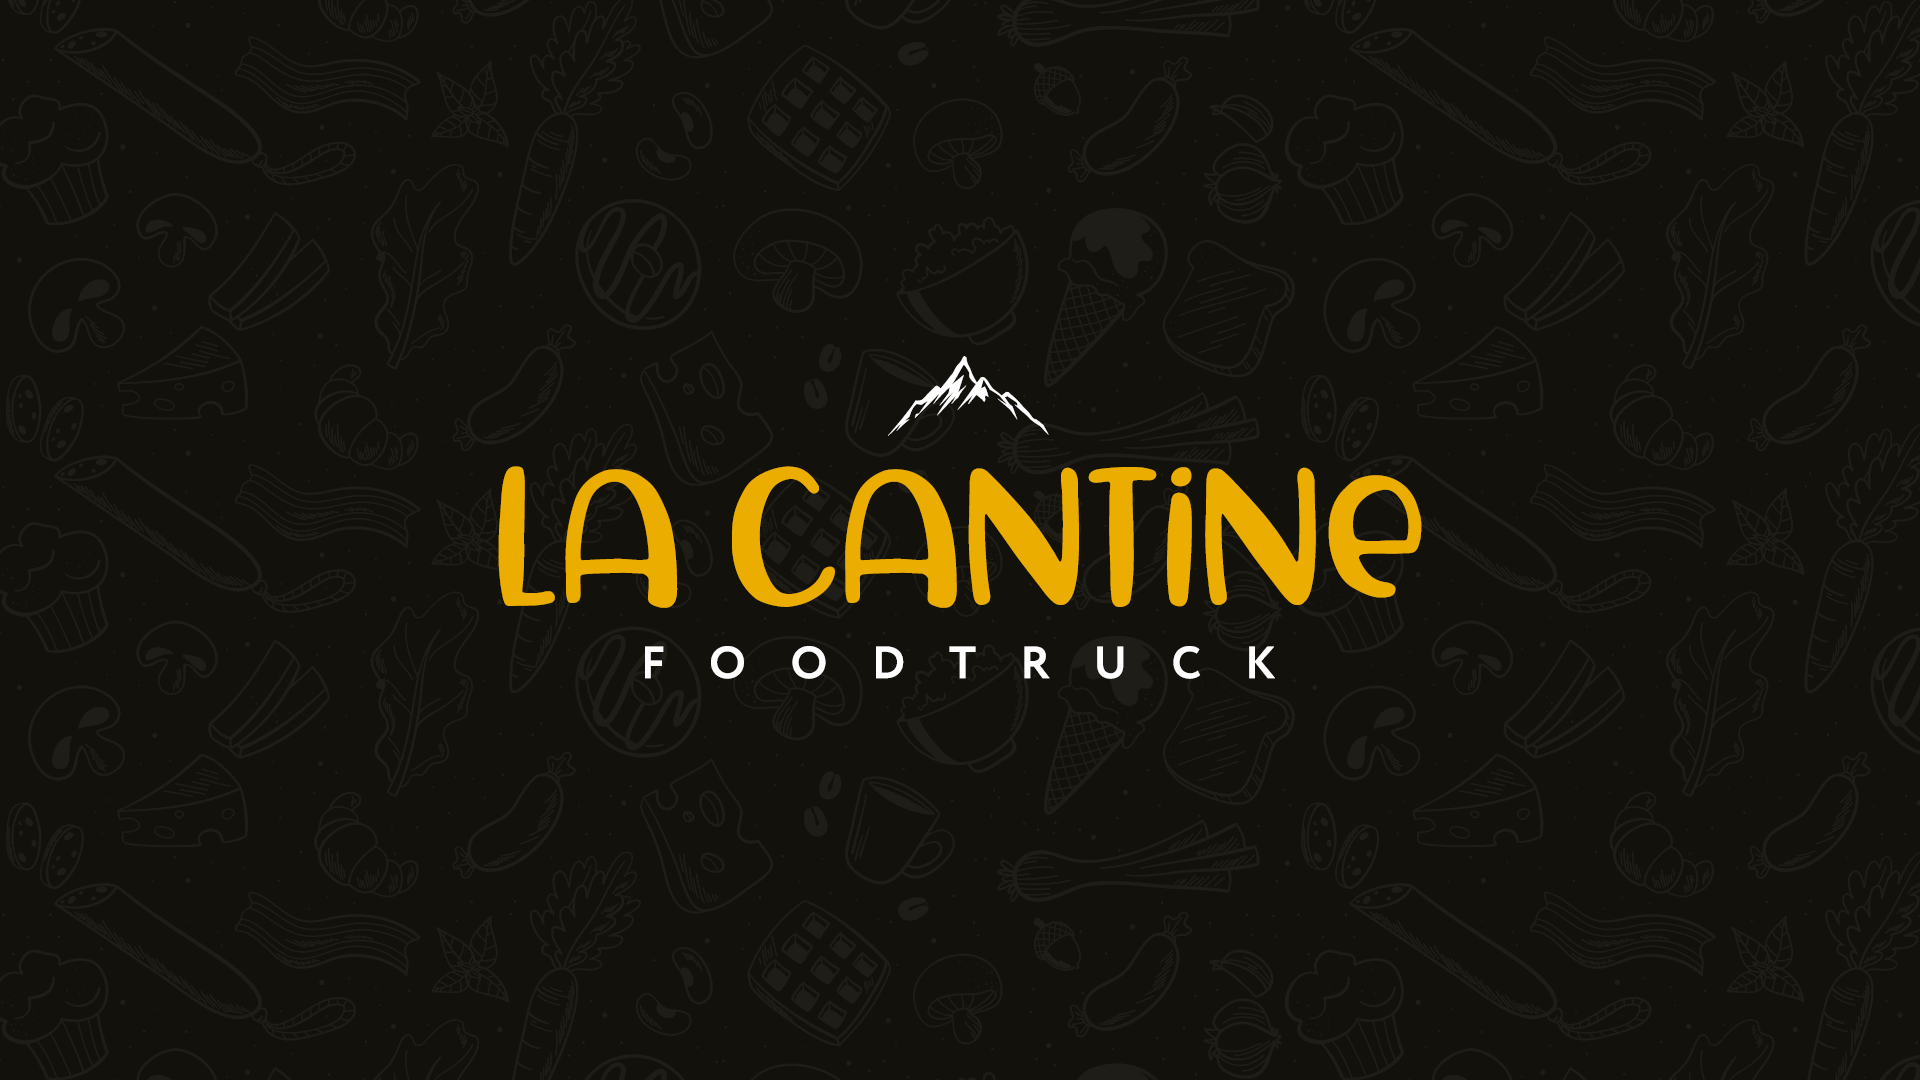 01.Cantine - Pres Behance.png